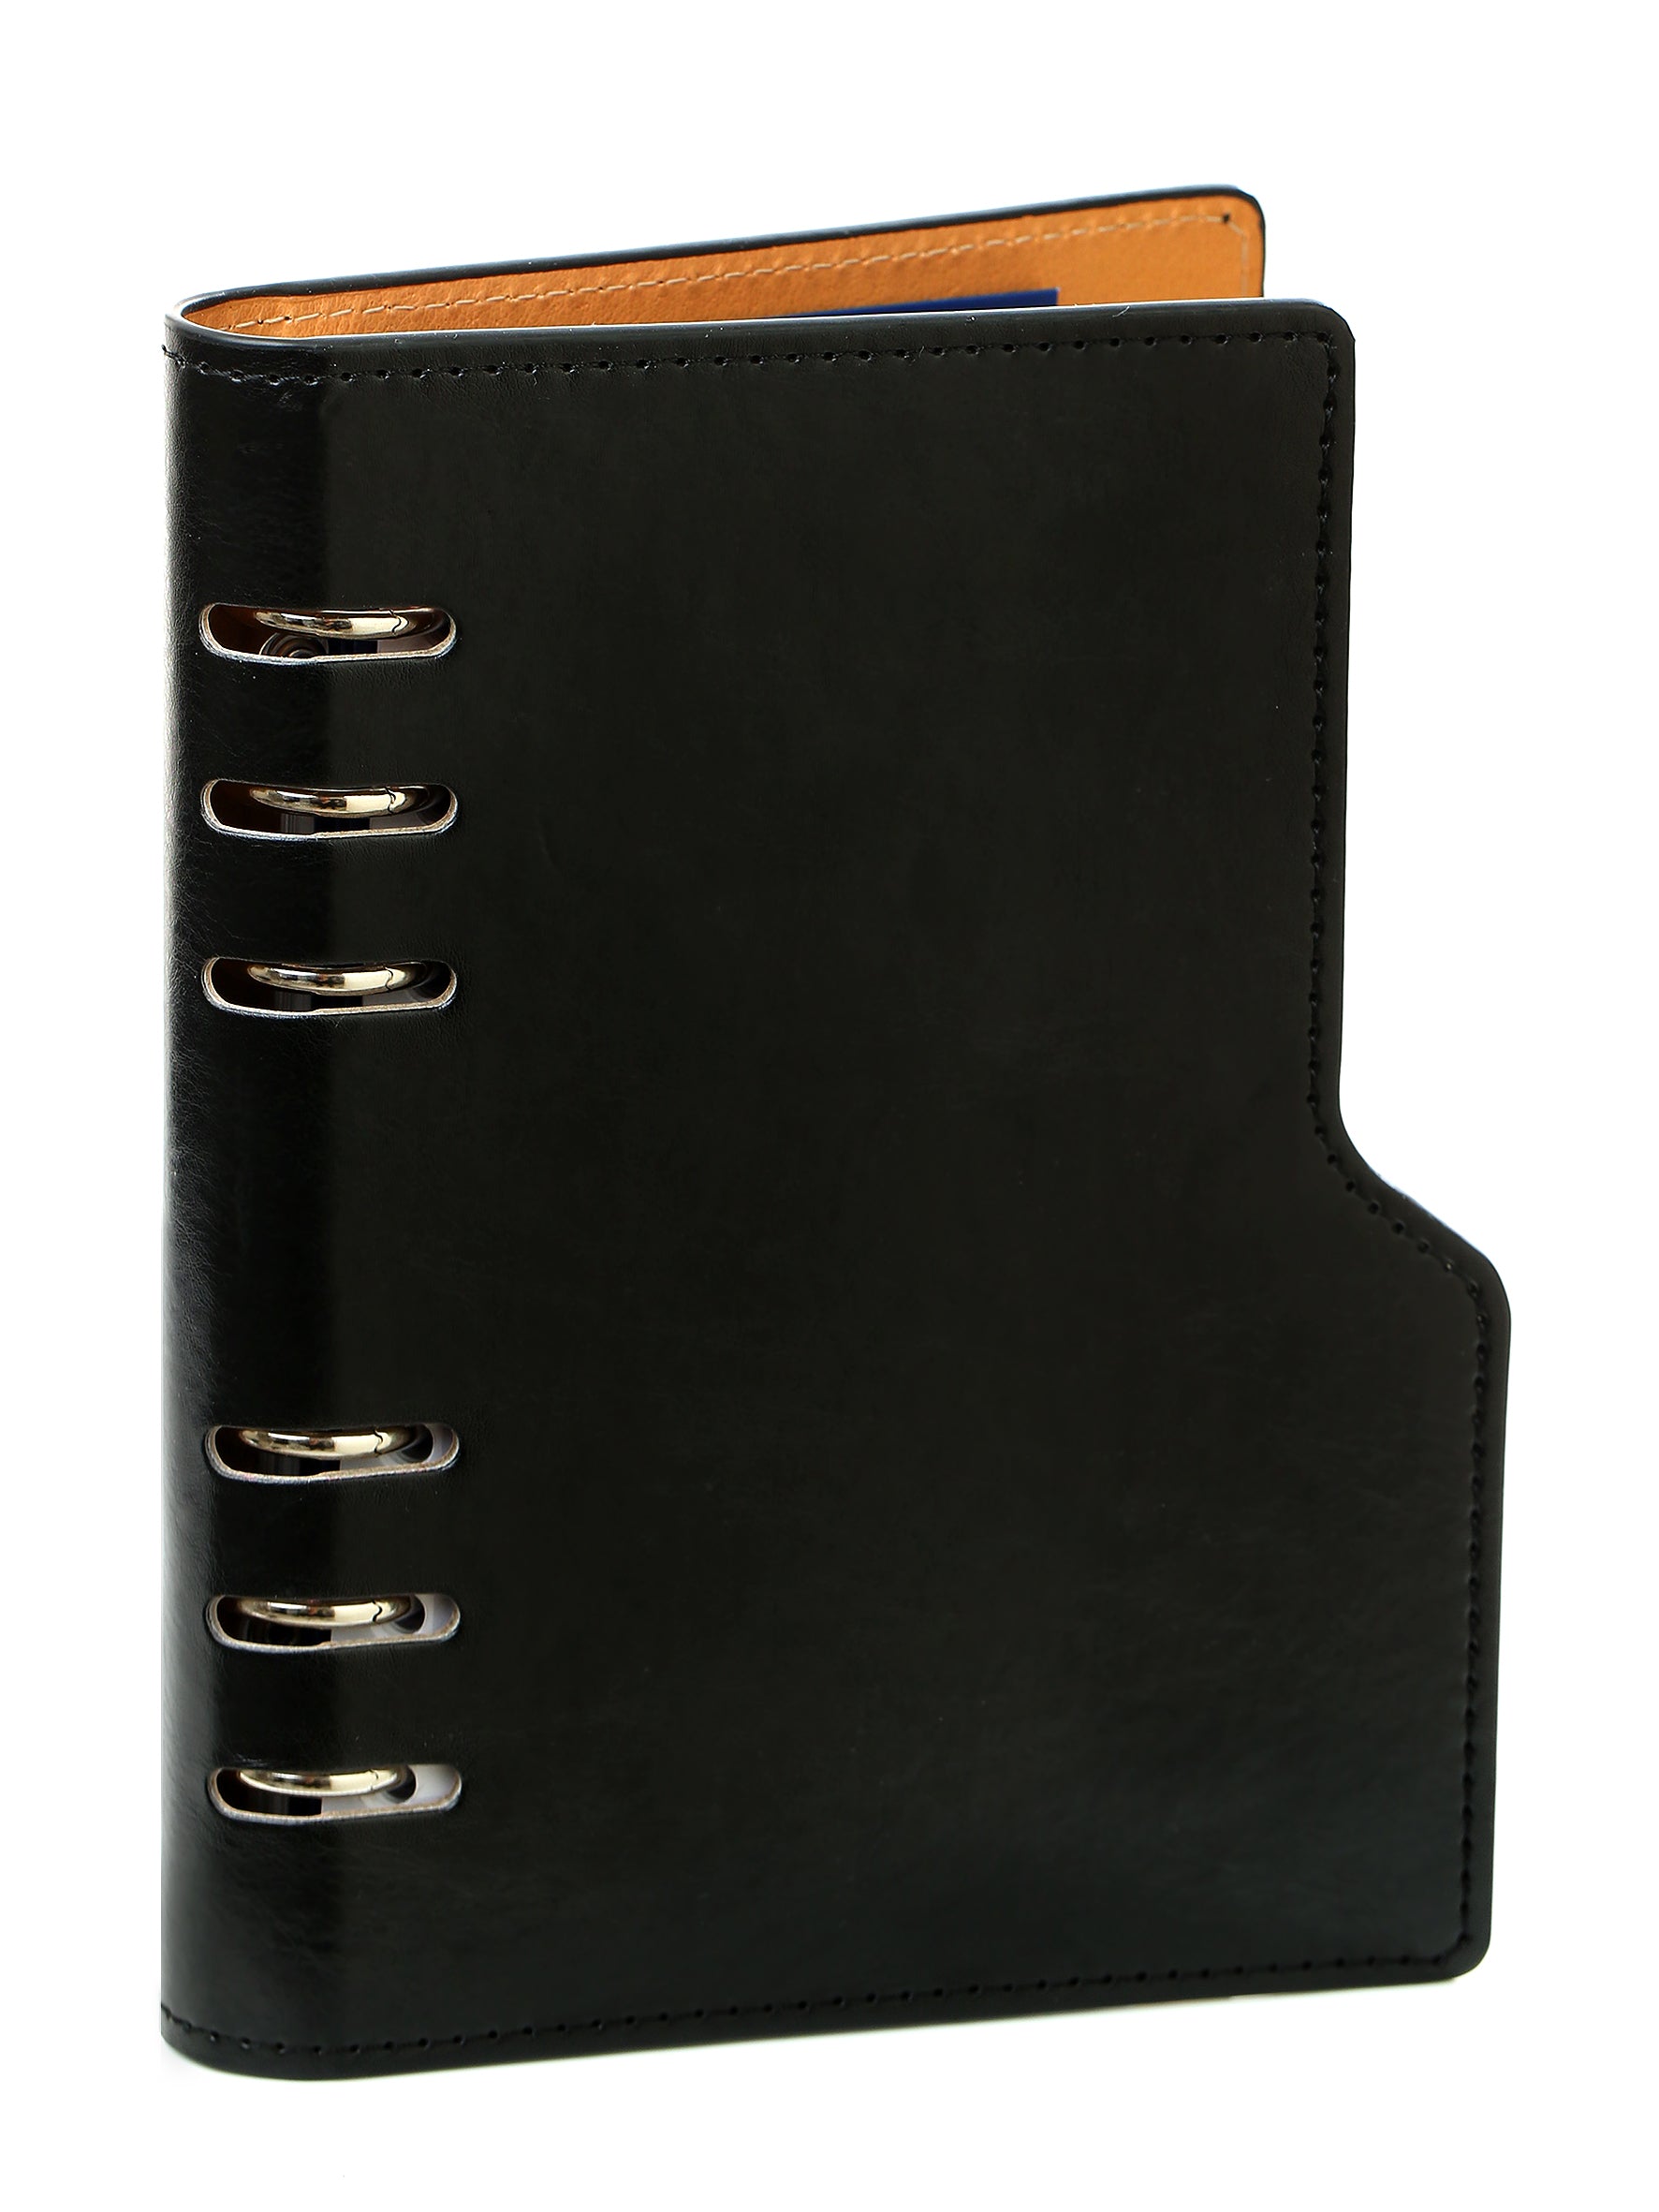 Refillable A5 Leather Binder Journal - 6 Ring Binder Organizer with Pockets  - Hand-Crafted Genuine Leather Folio - Filofax Compatible. Mixed Loose Leaf  Pages, 22cm x 15cm : Amazon.in: Office Products